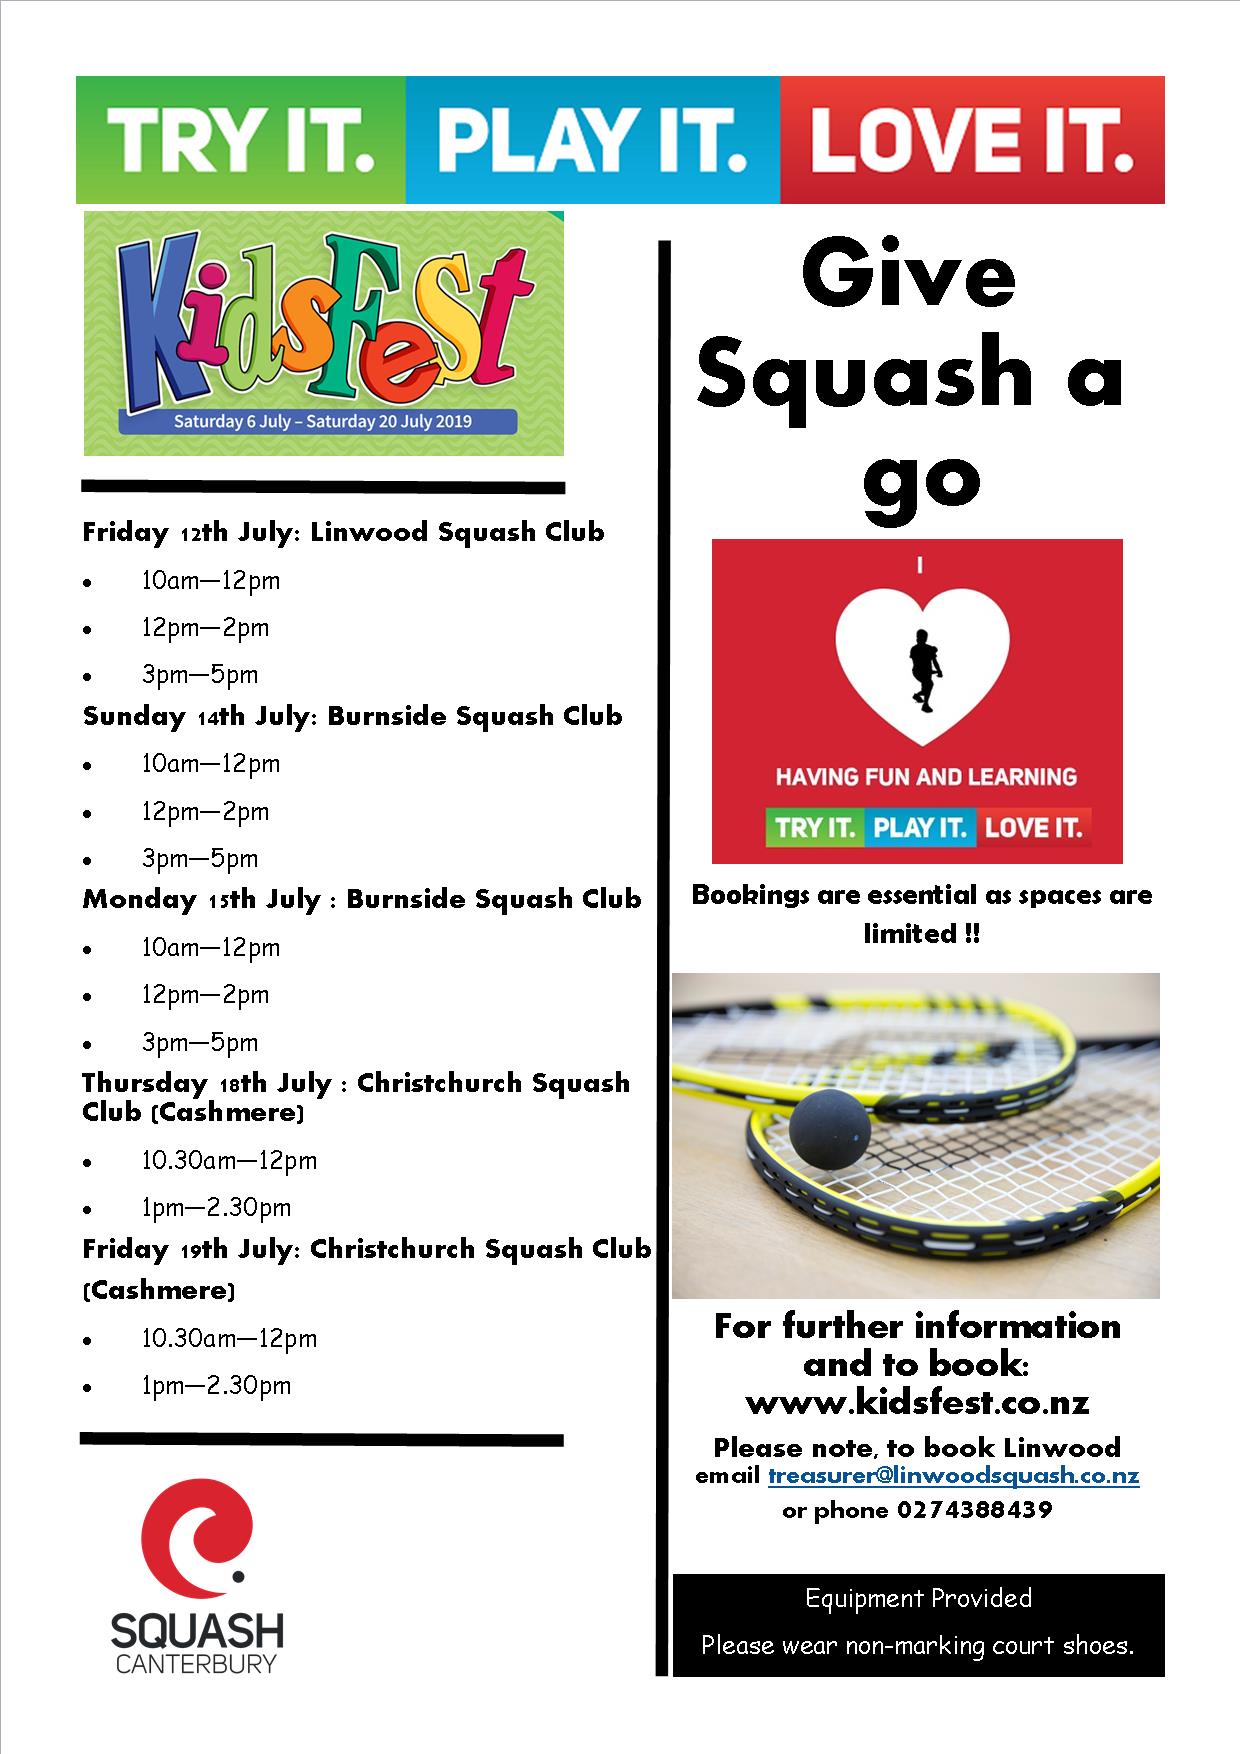 Kidsfest 2019 Give Squash a go